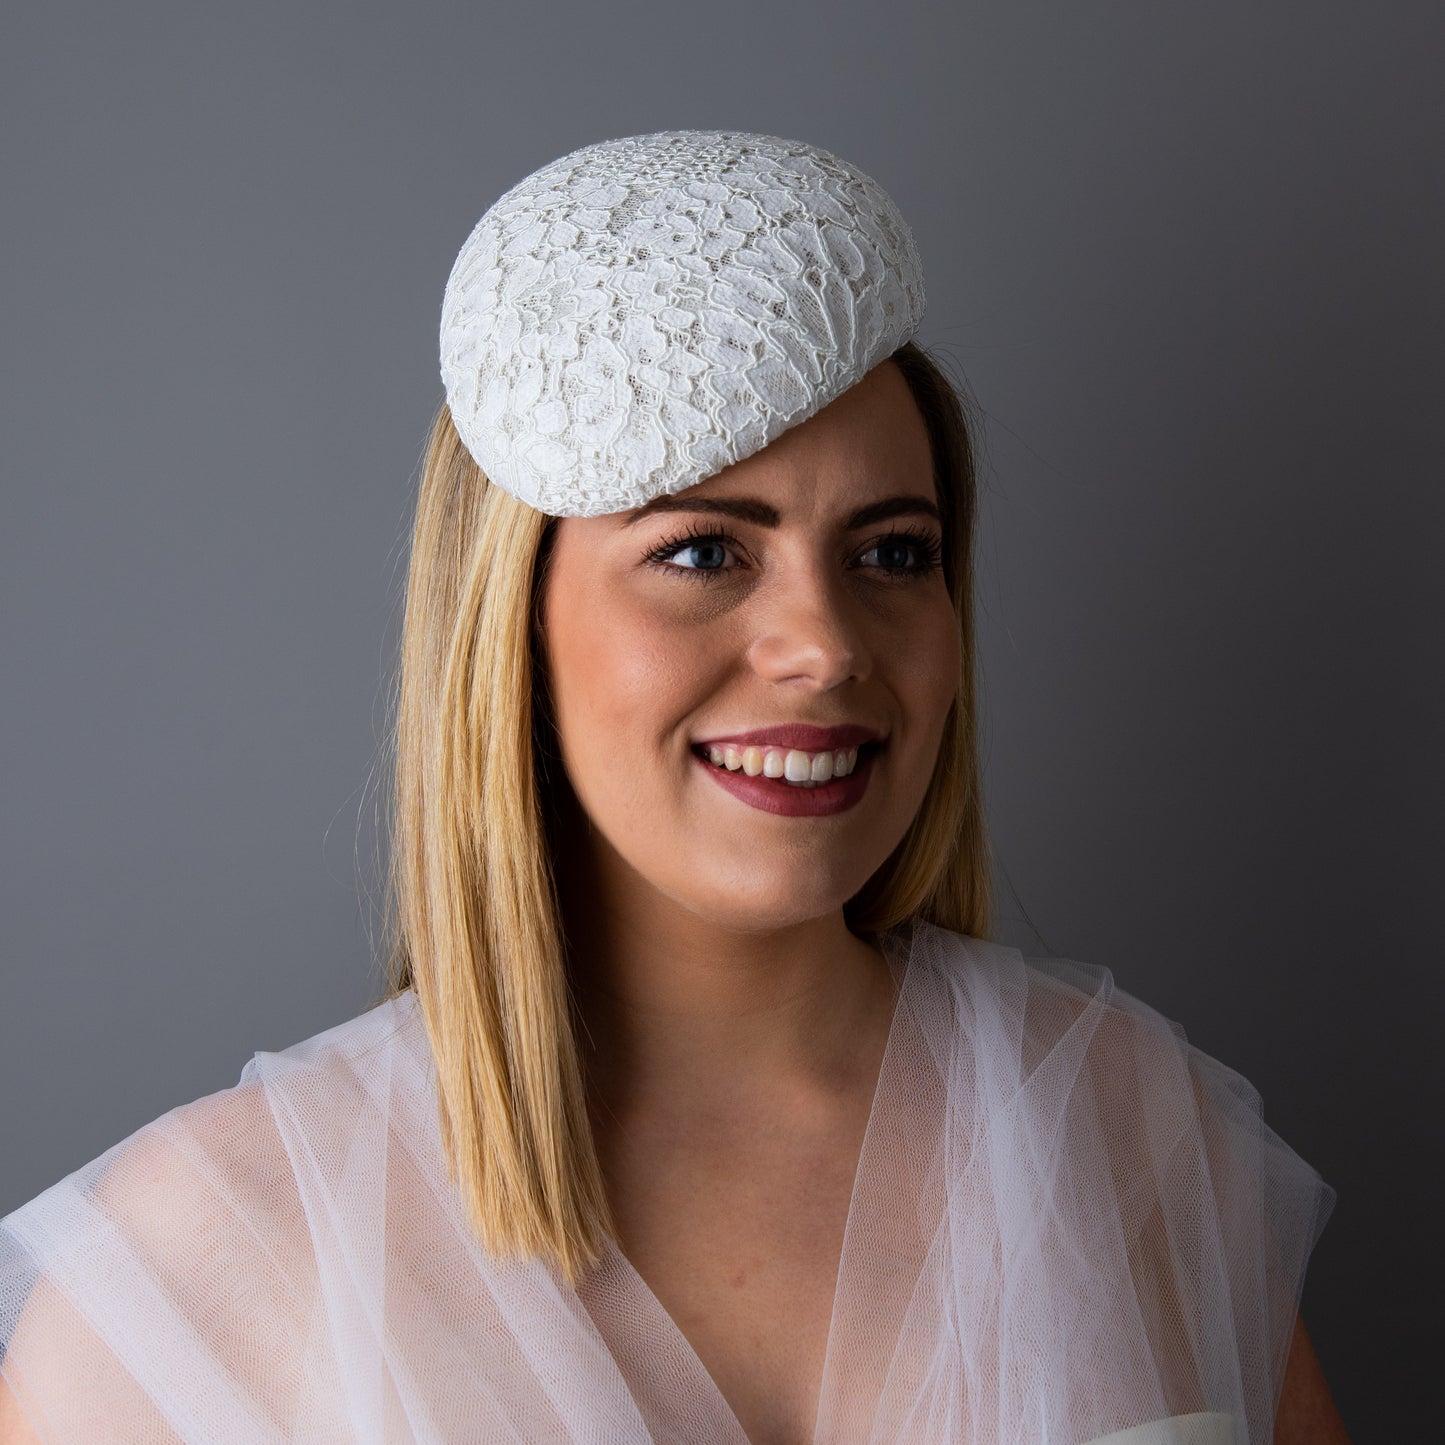 The Very Thought of You white lace beret